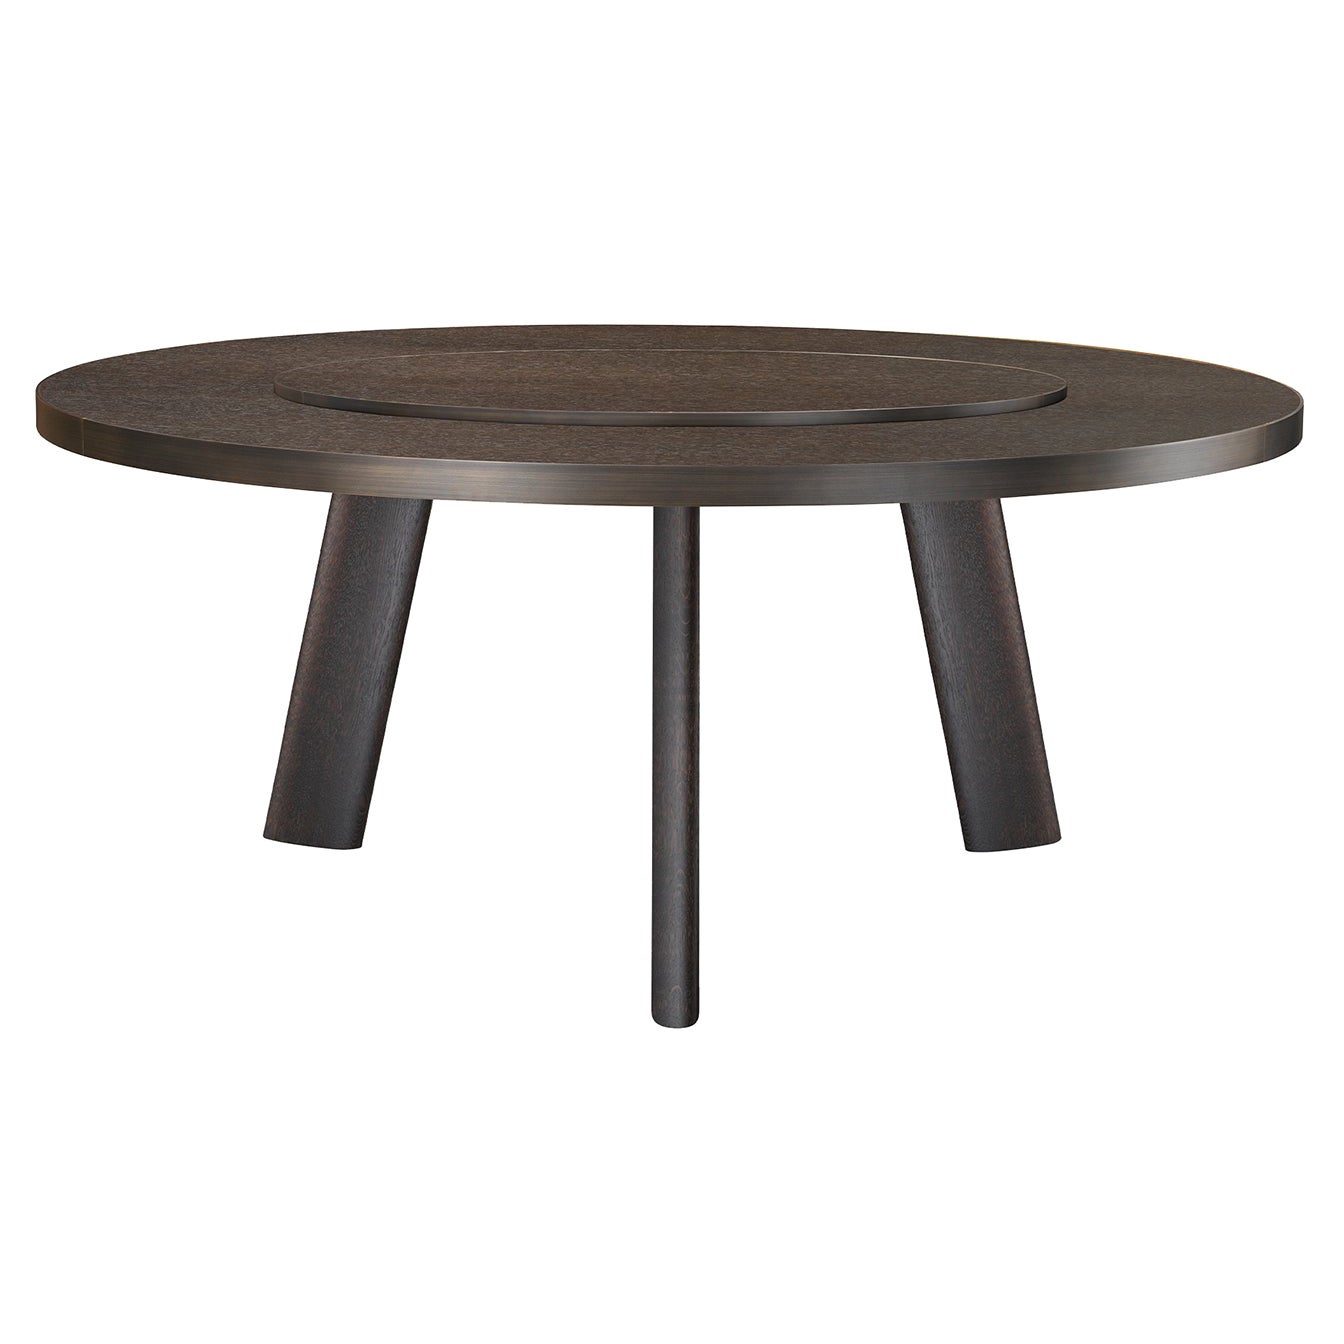 Native Round Brown Table by Stefano Giovannoni